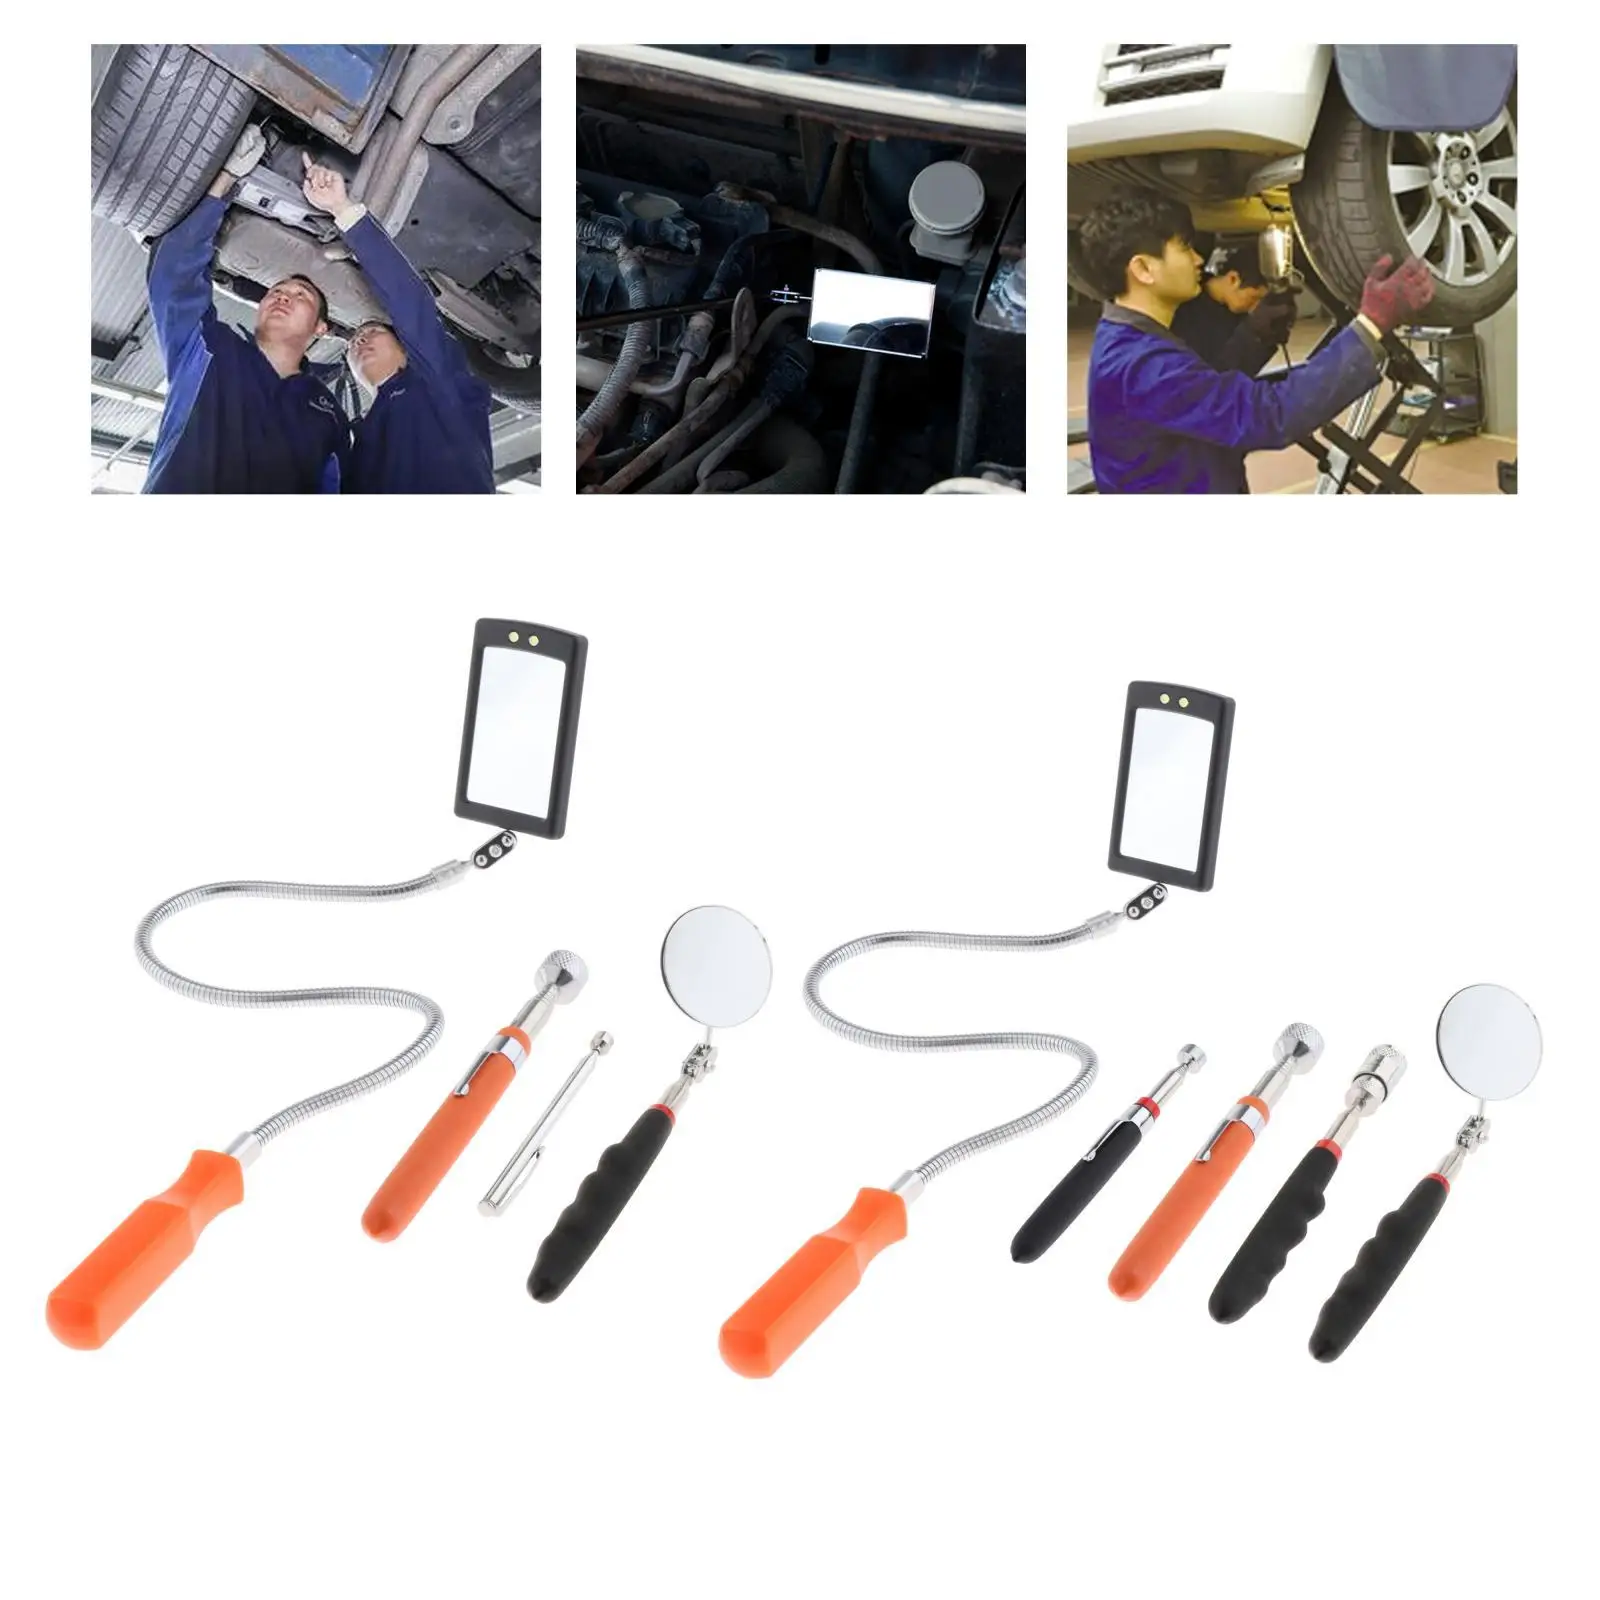 Magnetic Telescoping Pick-Up Tool Kit Auto Repair Detector for Areas Boyfriend